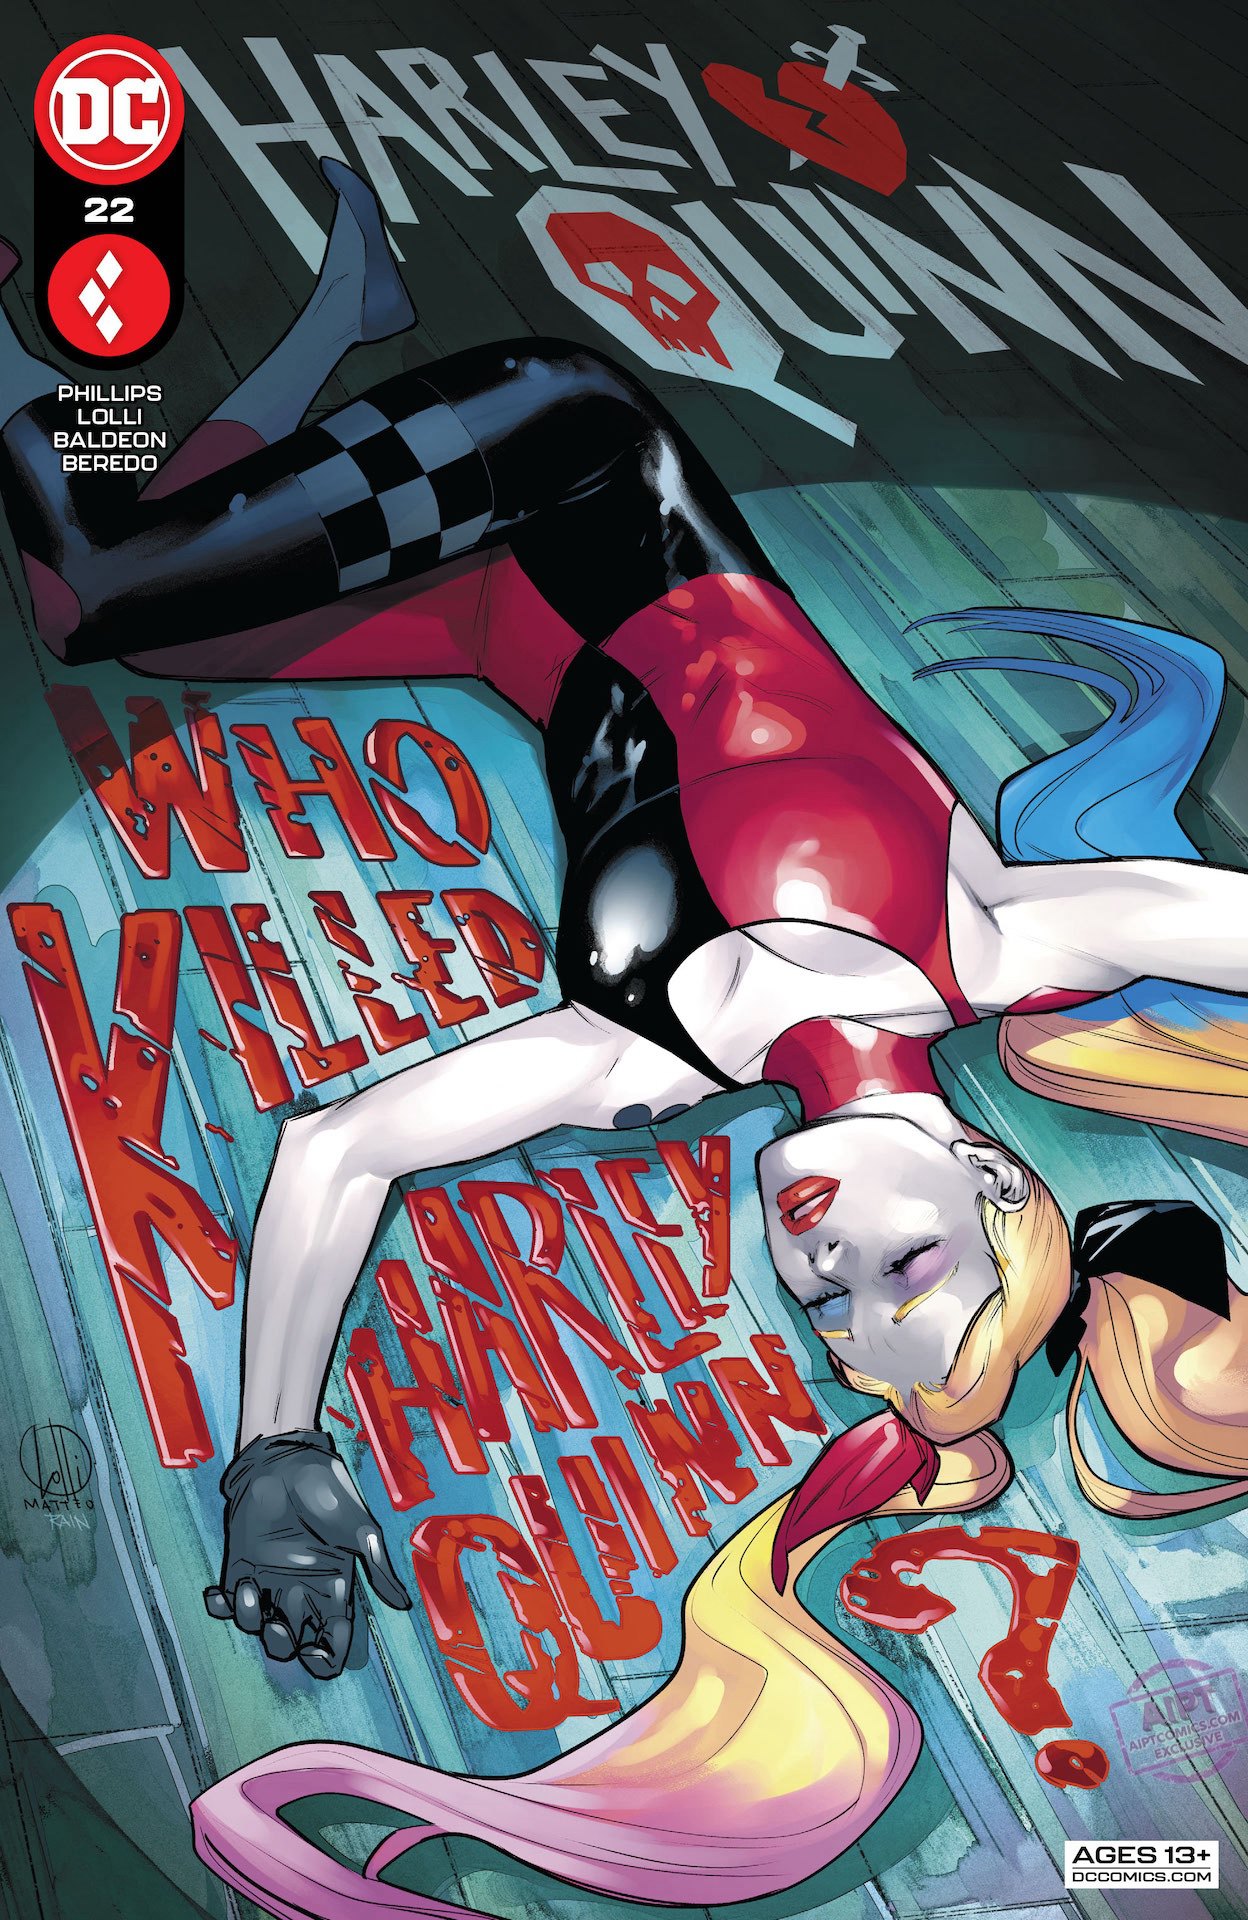 DC Preview: Harley Quinn #22